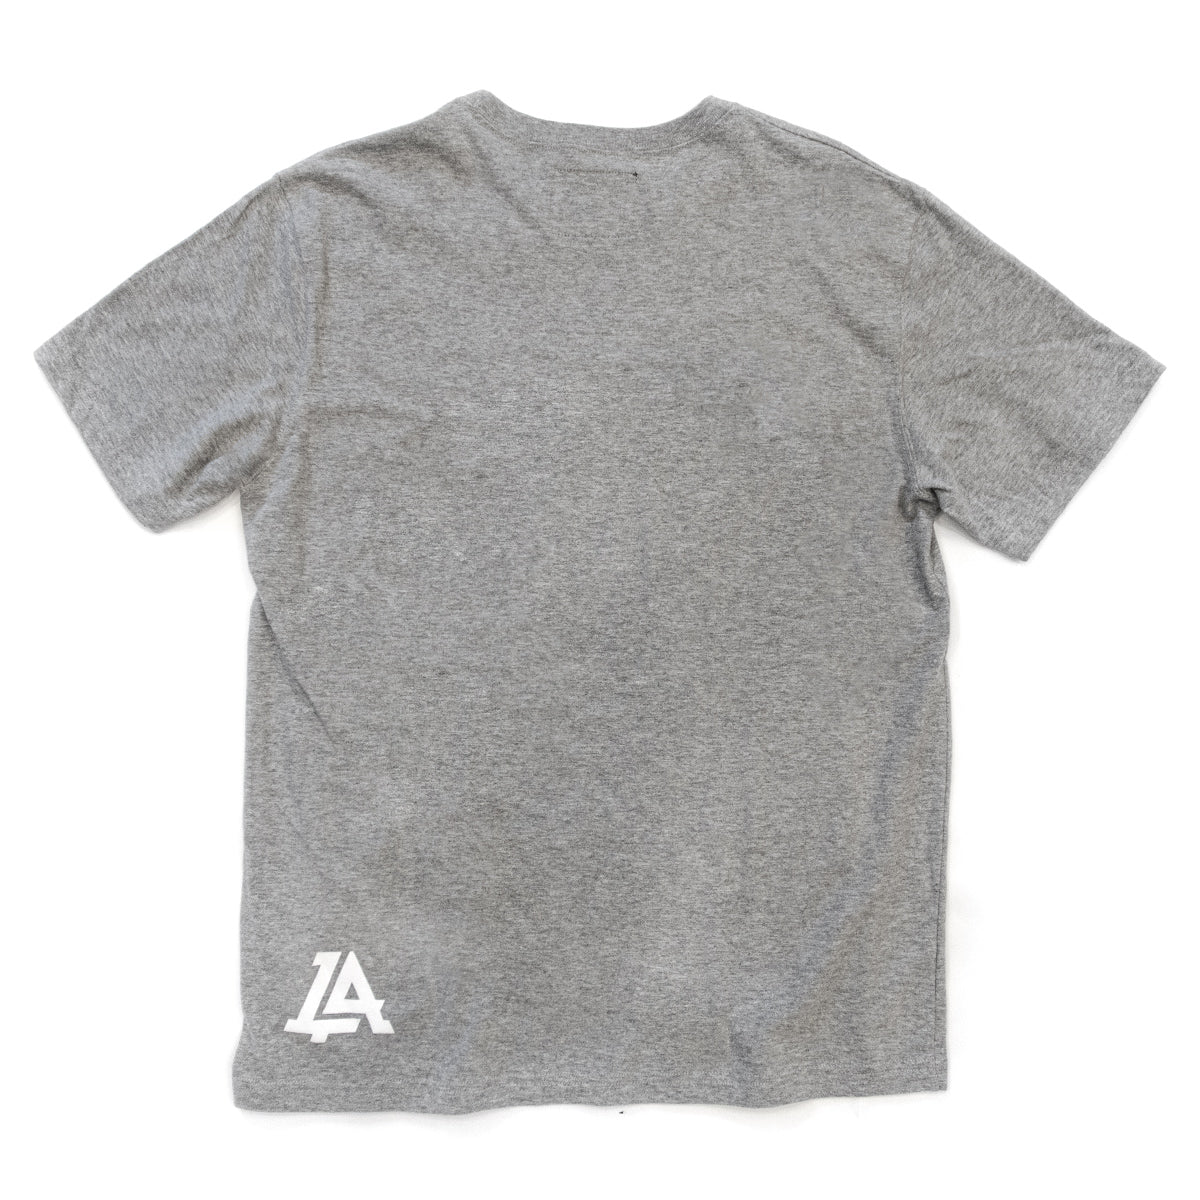 Lost Art Canada - white on grey basic logo tee back view